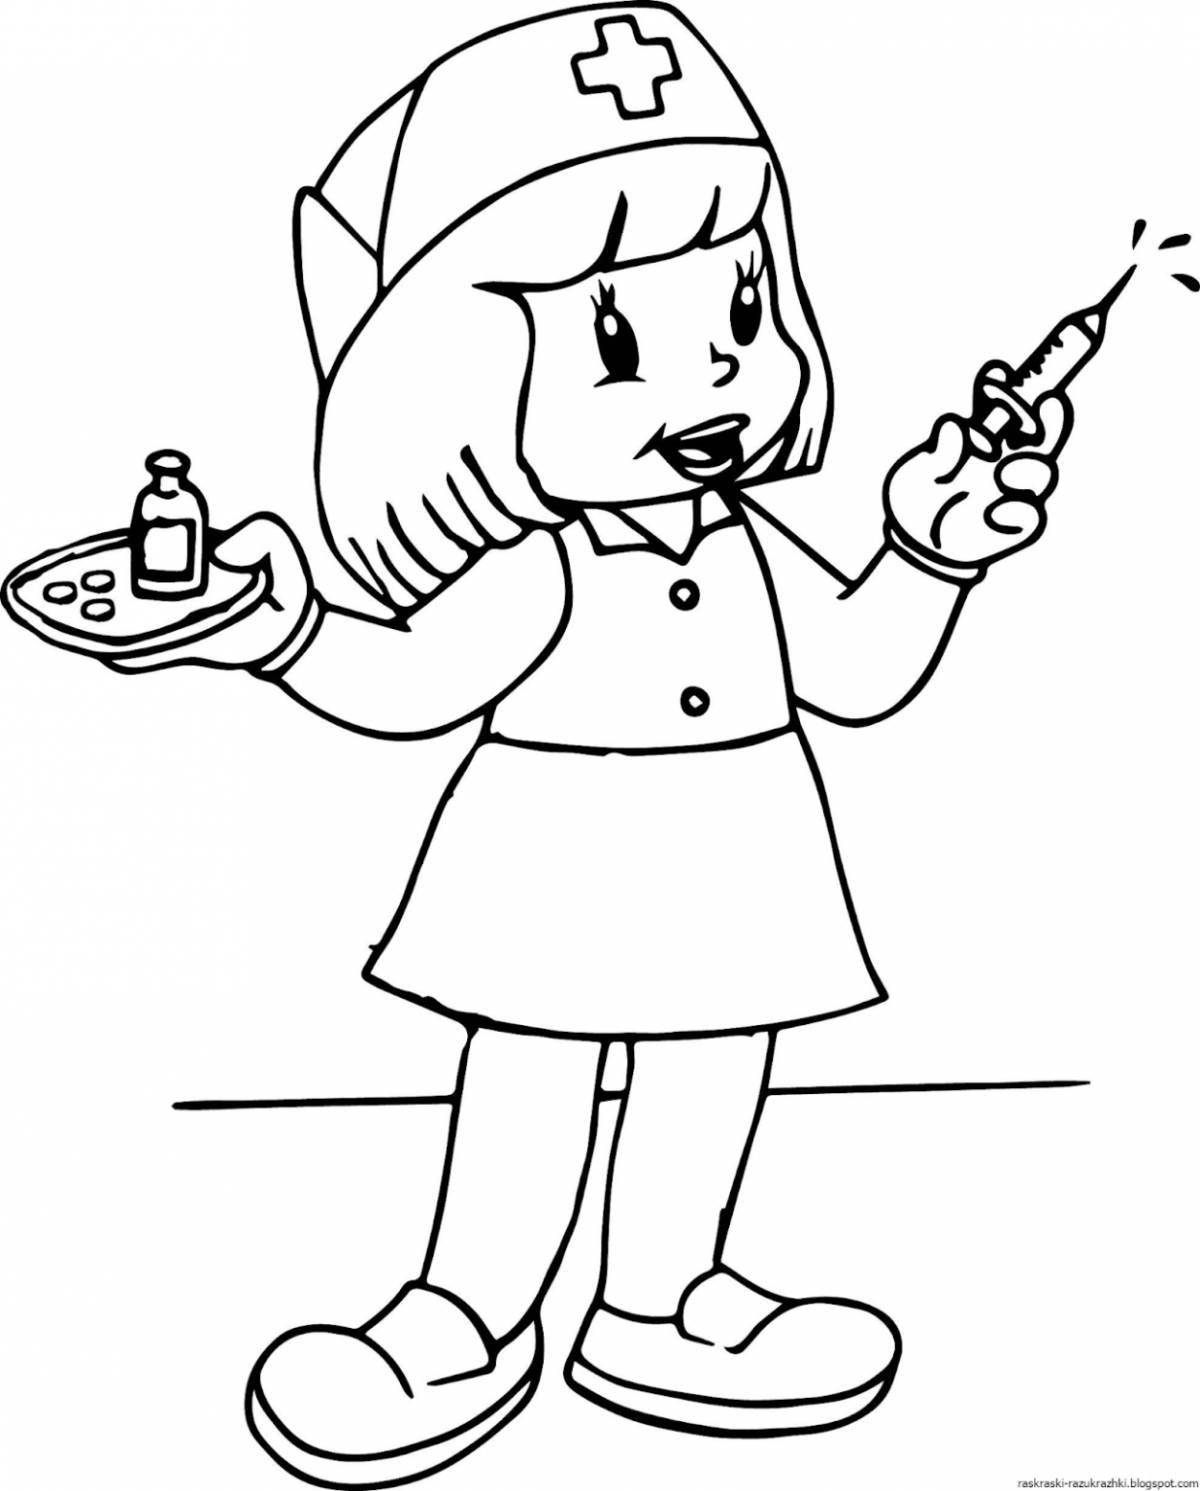 High coloring page